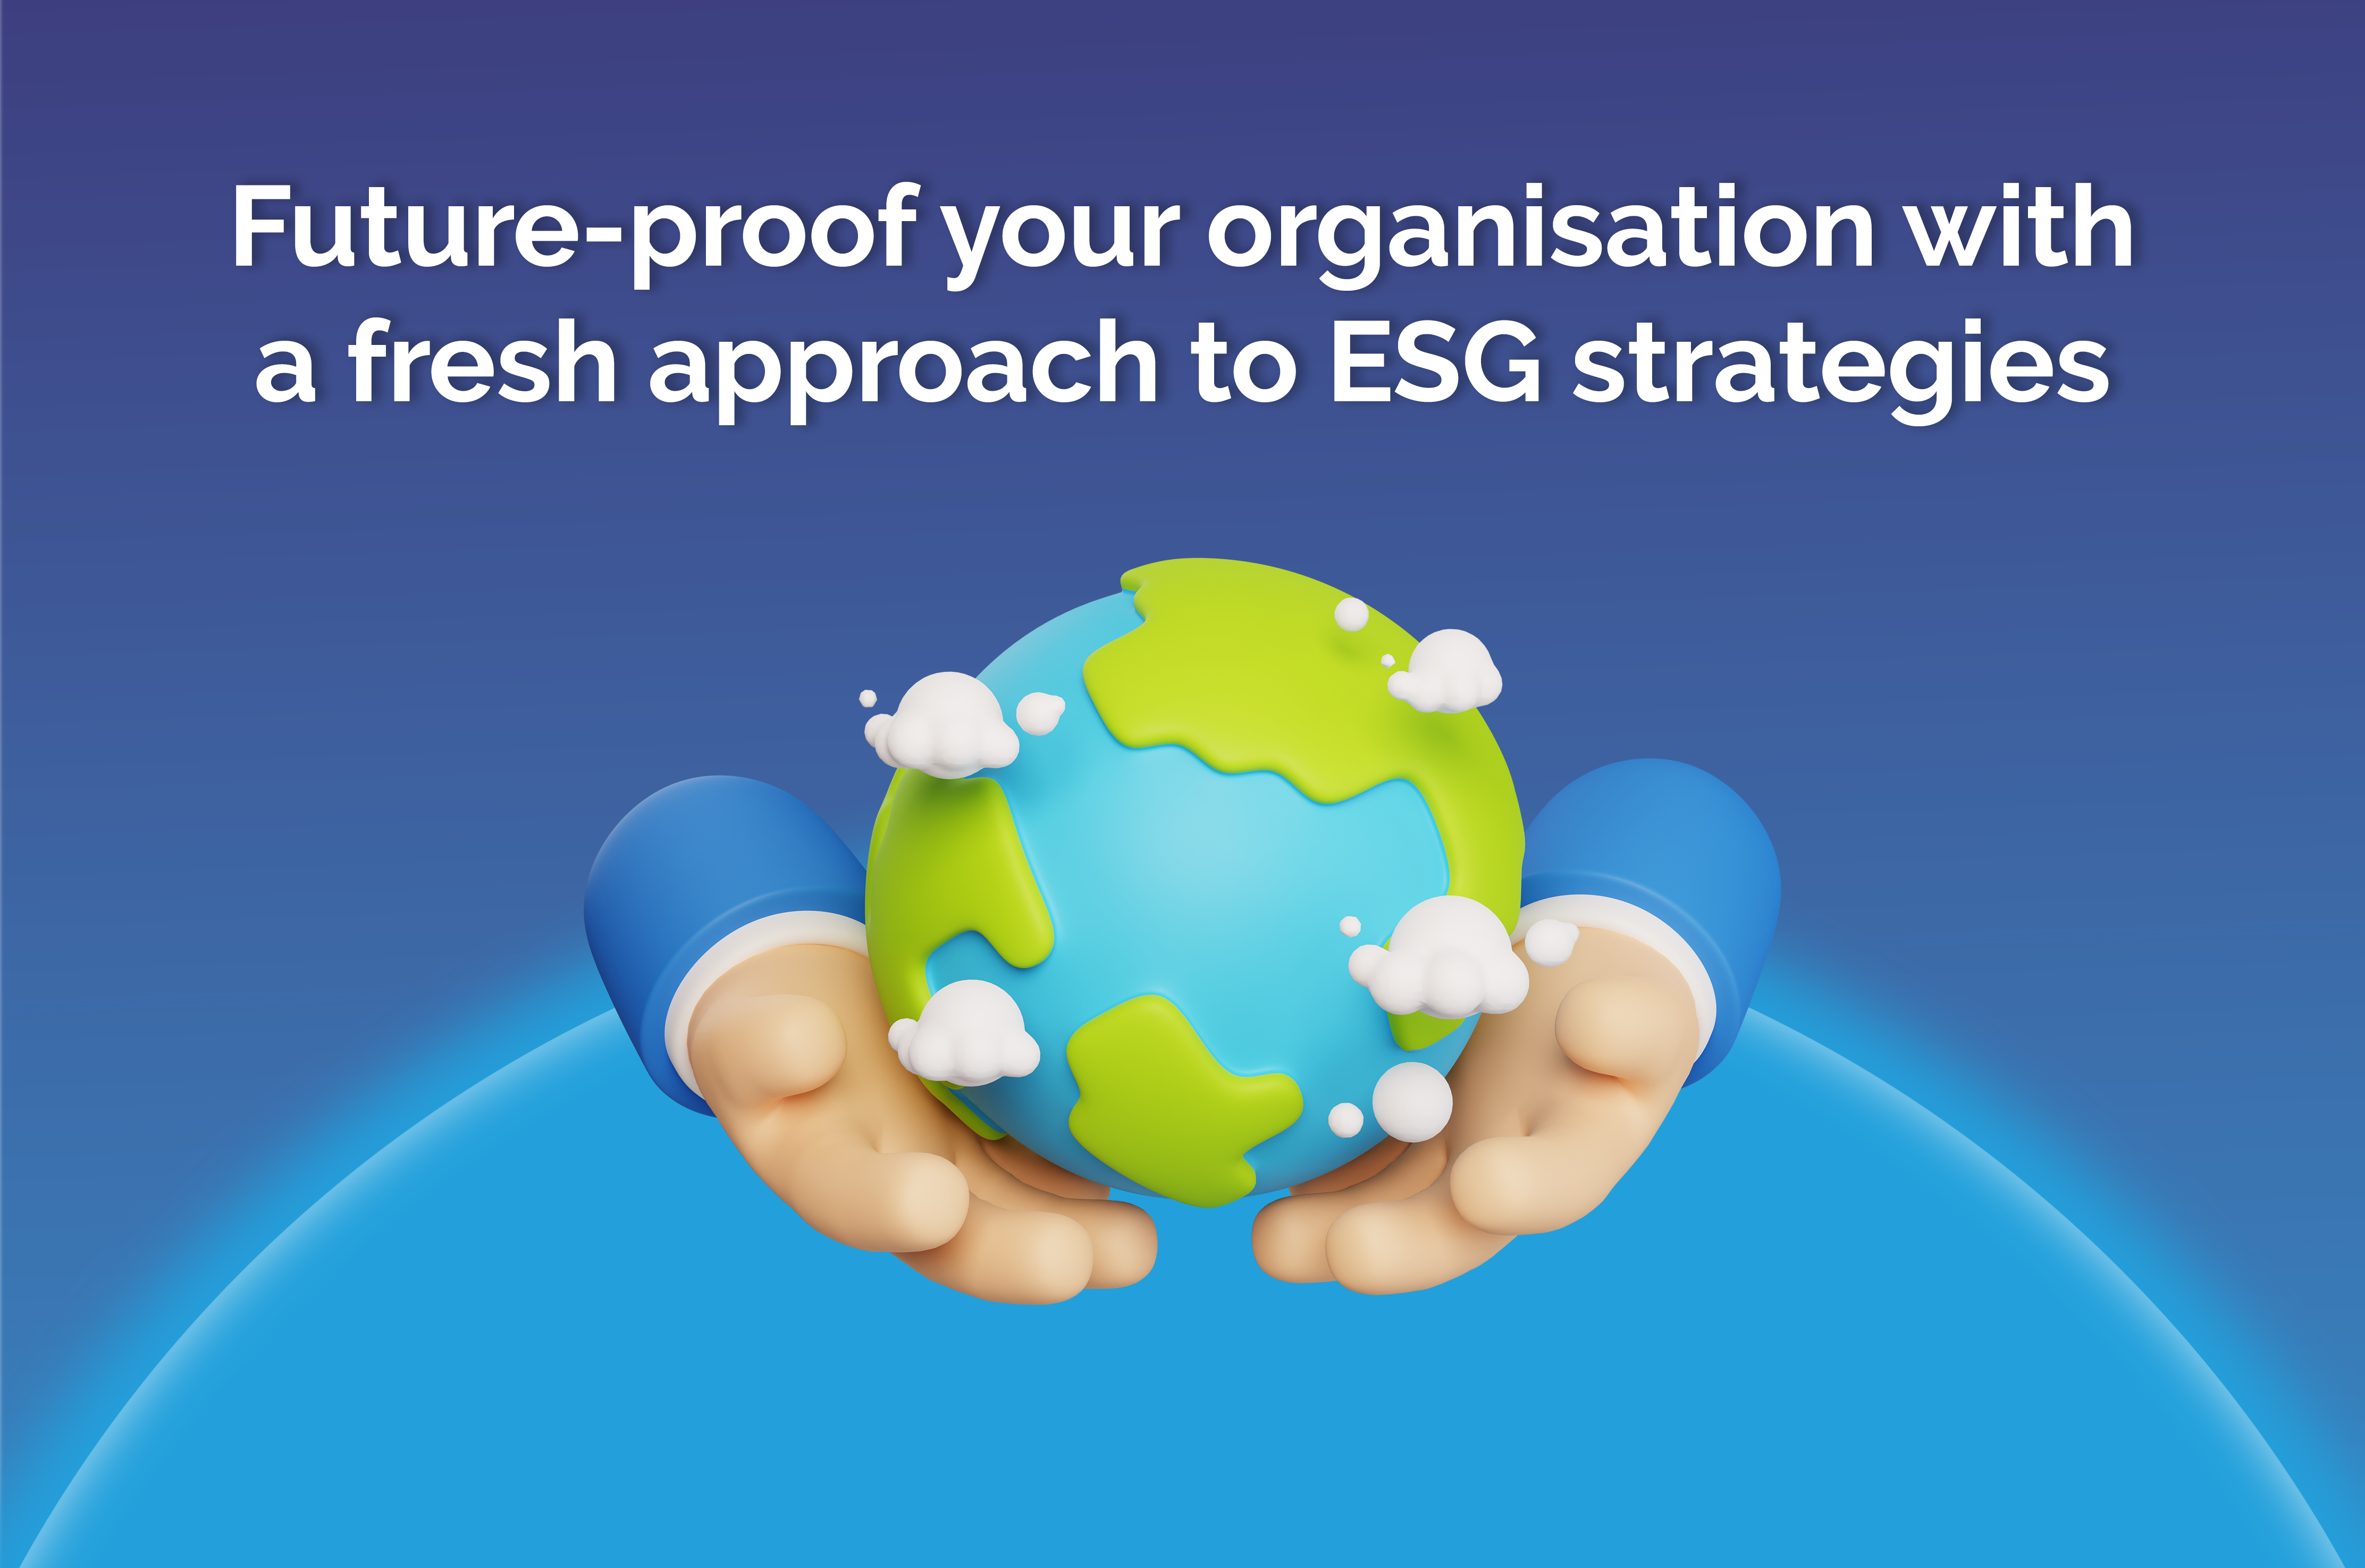 Future proof your organisation with a fresh approach to ESG strategies